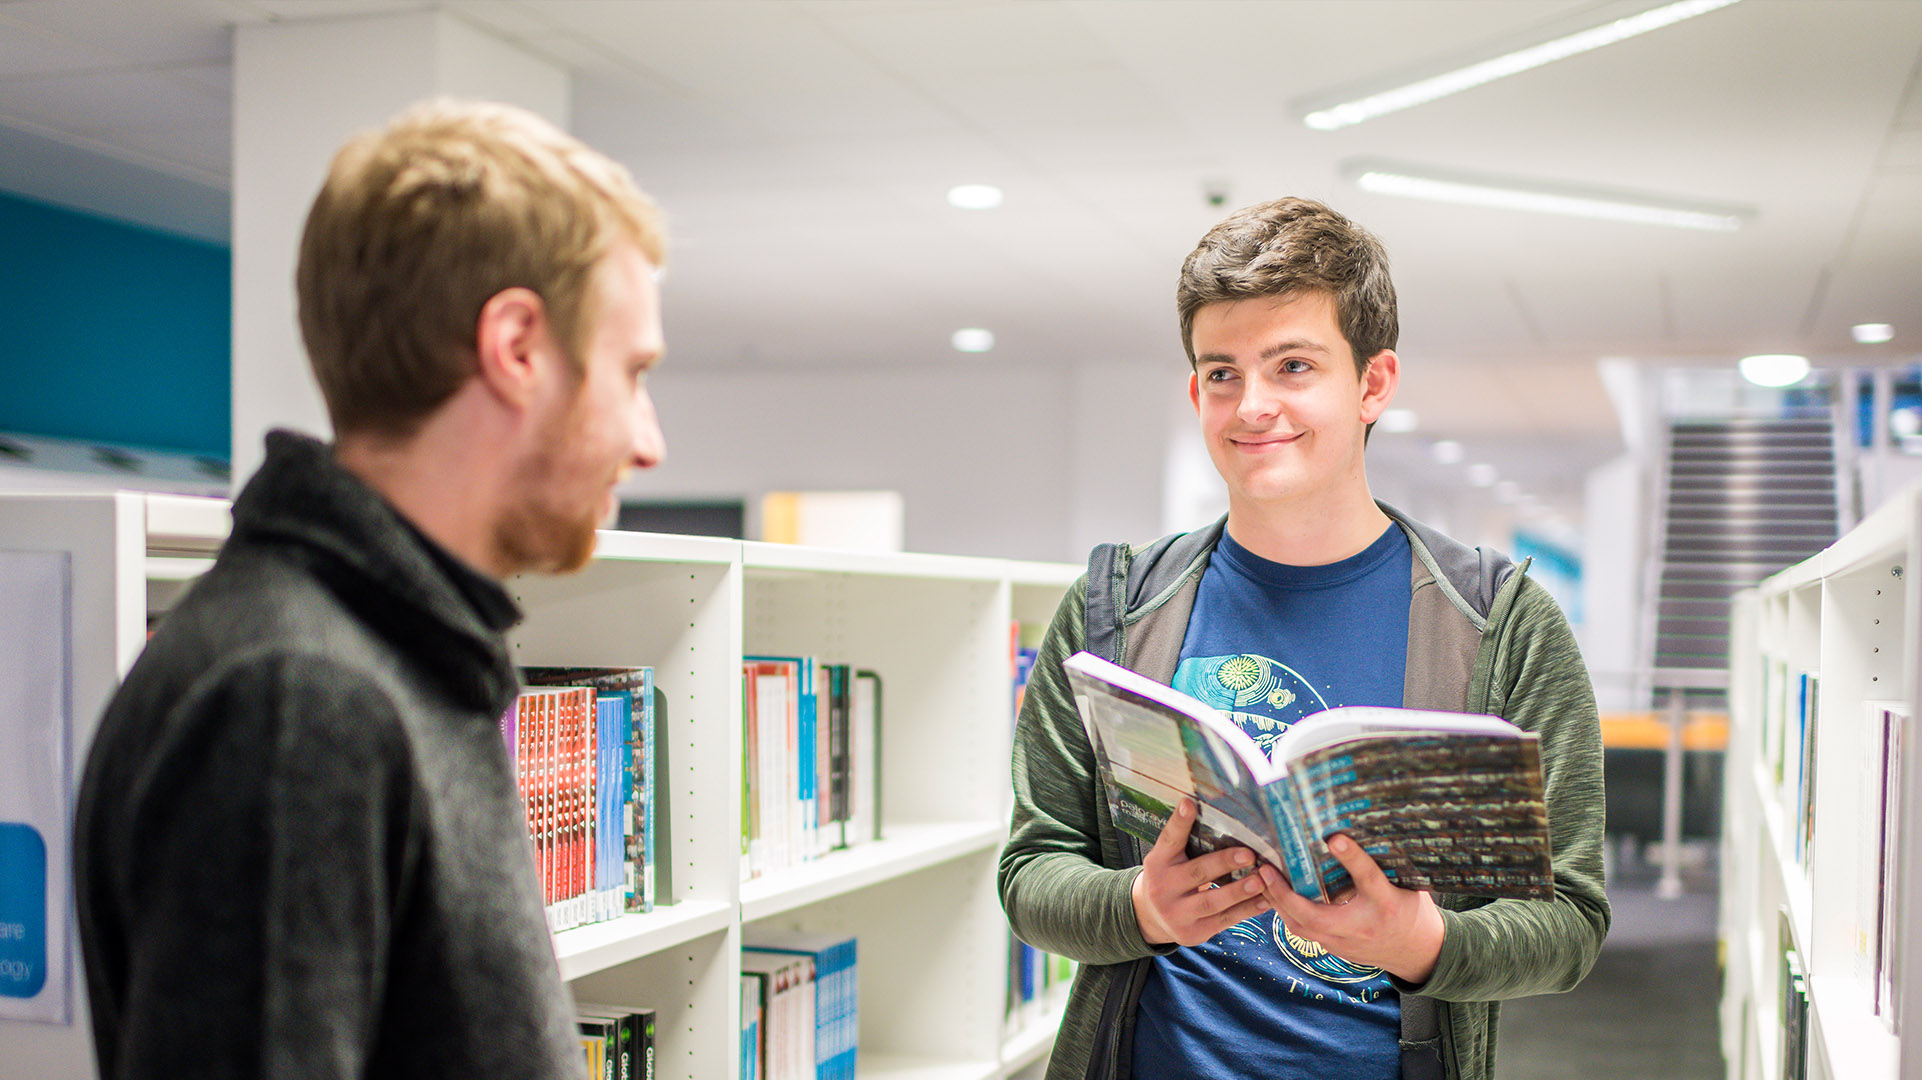 Two Law and Practice students in discussion in the library